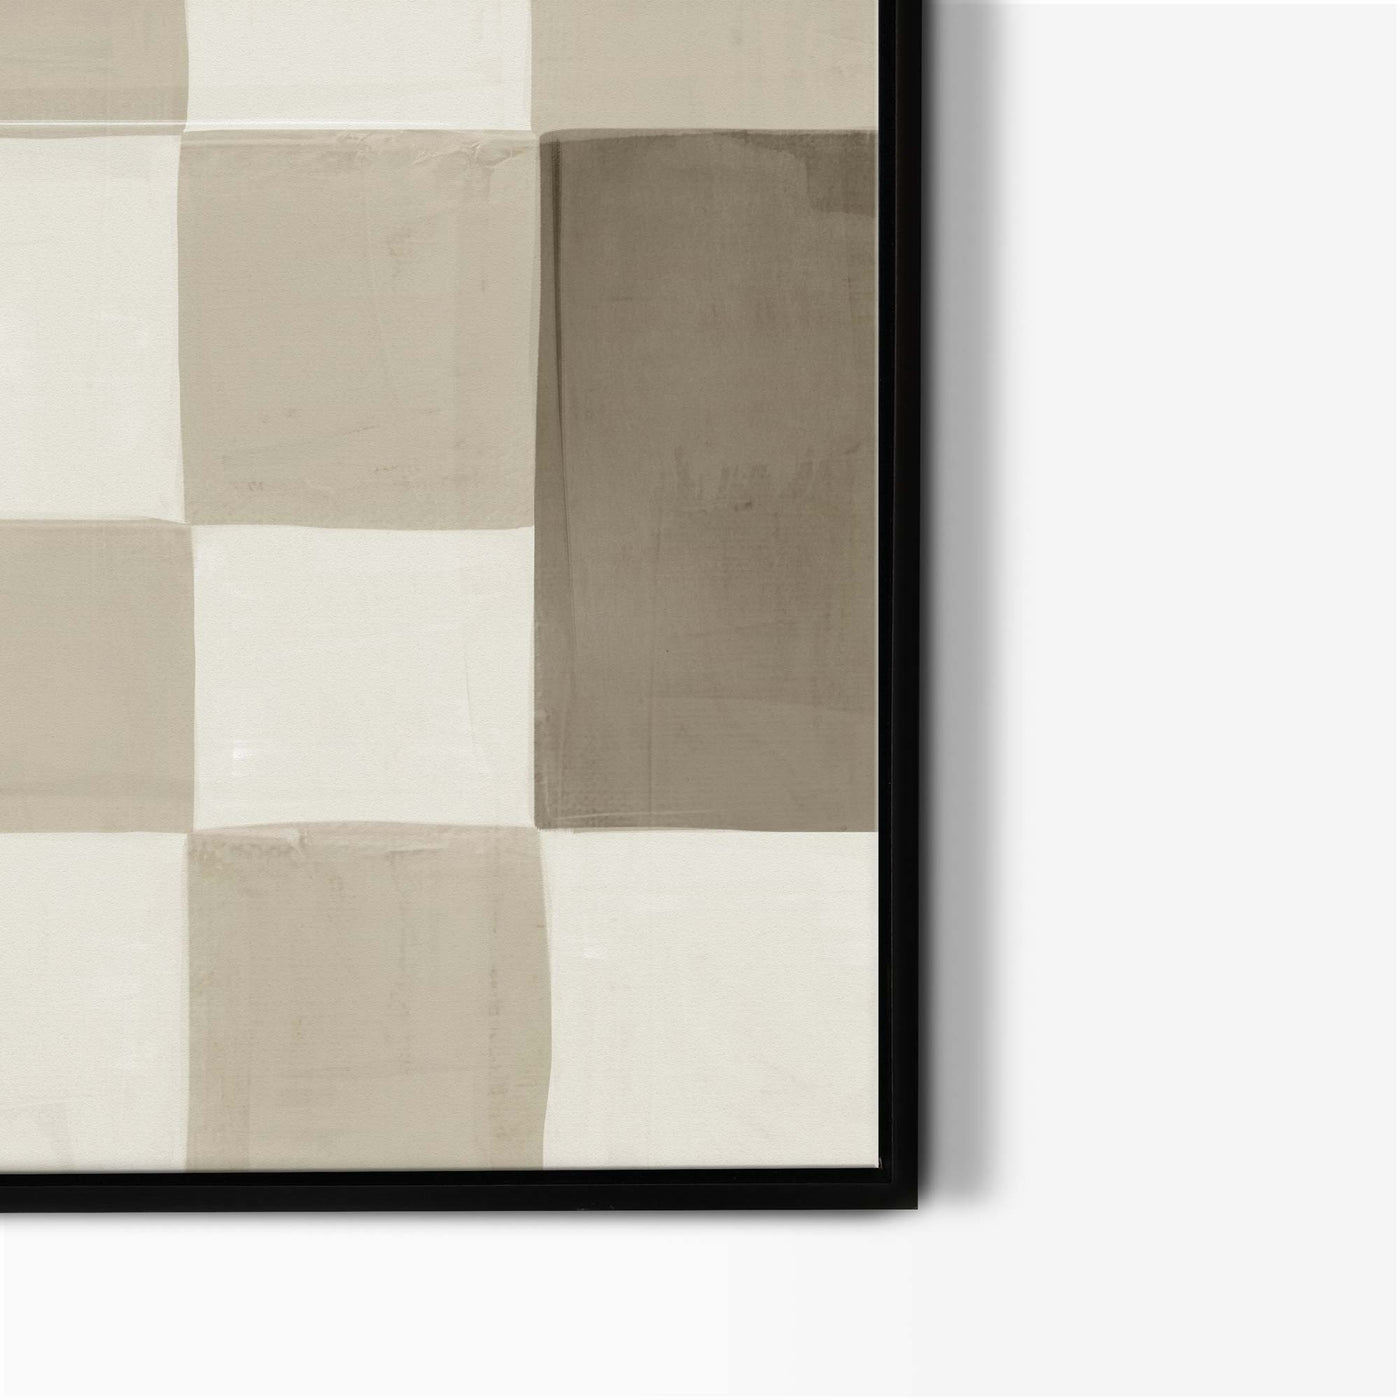 Go With The Flow & Neutral Checkerboard Canvas Set